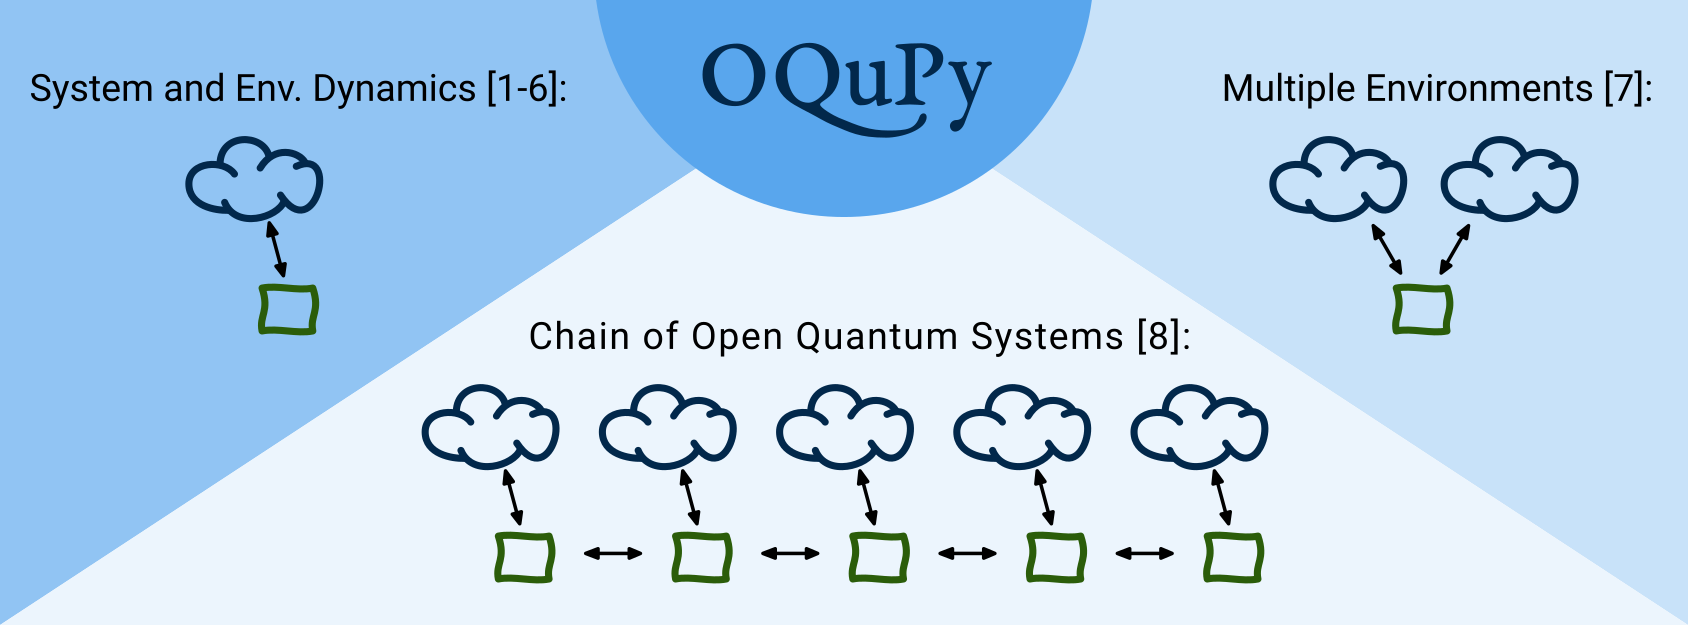 OQuPy - overview